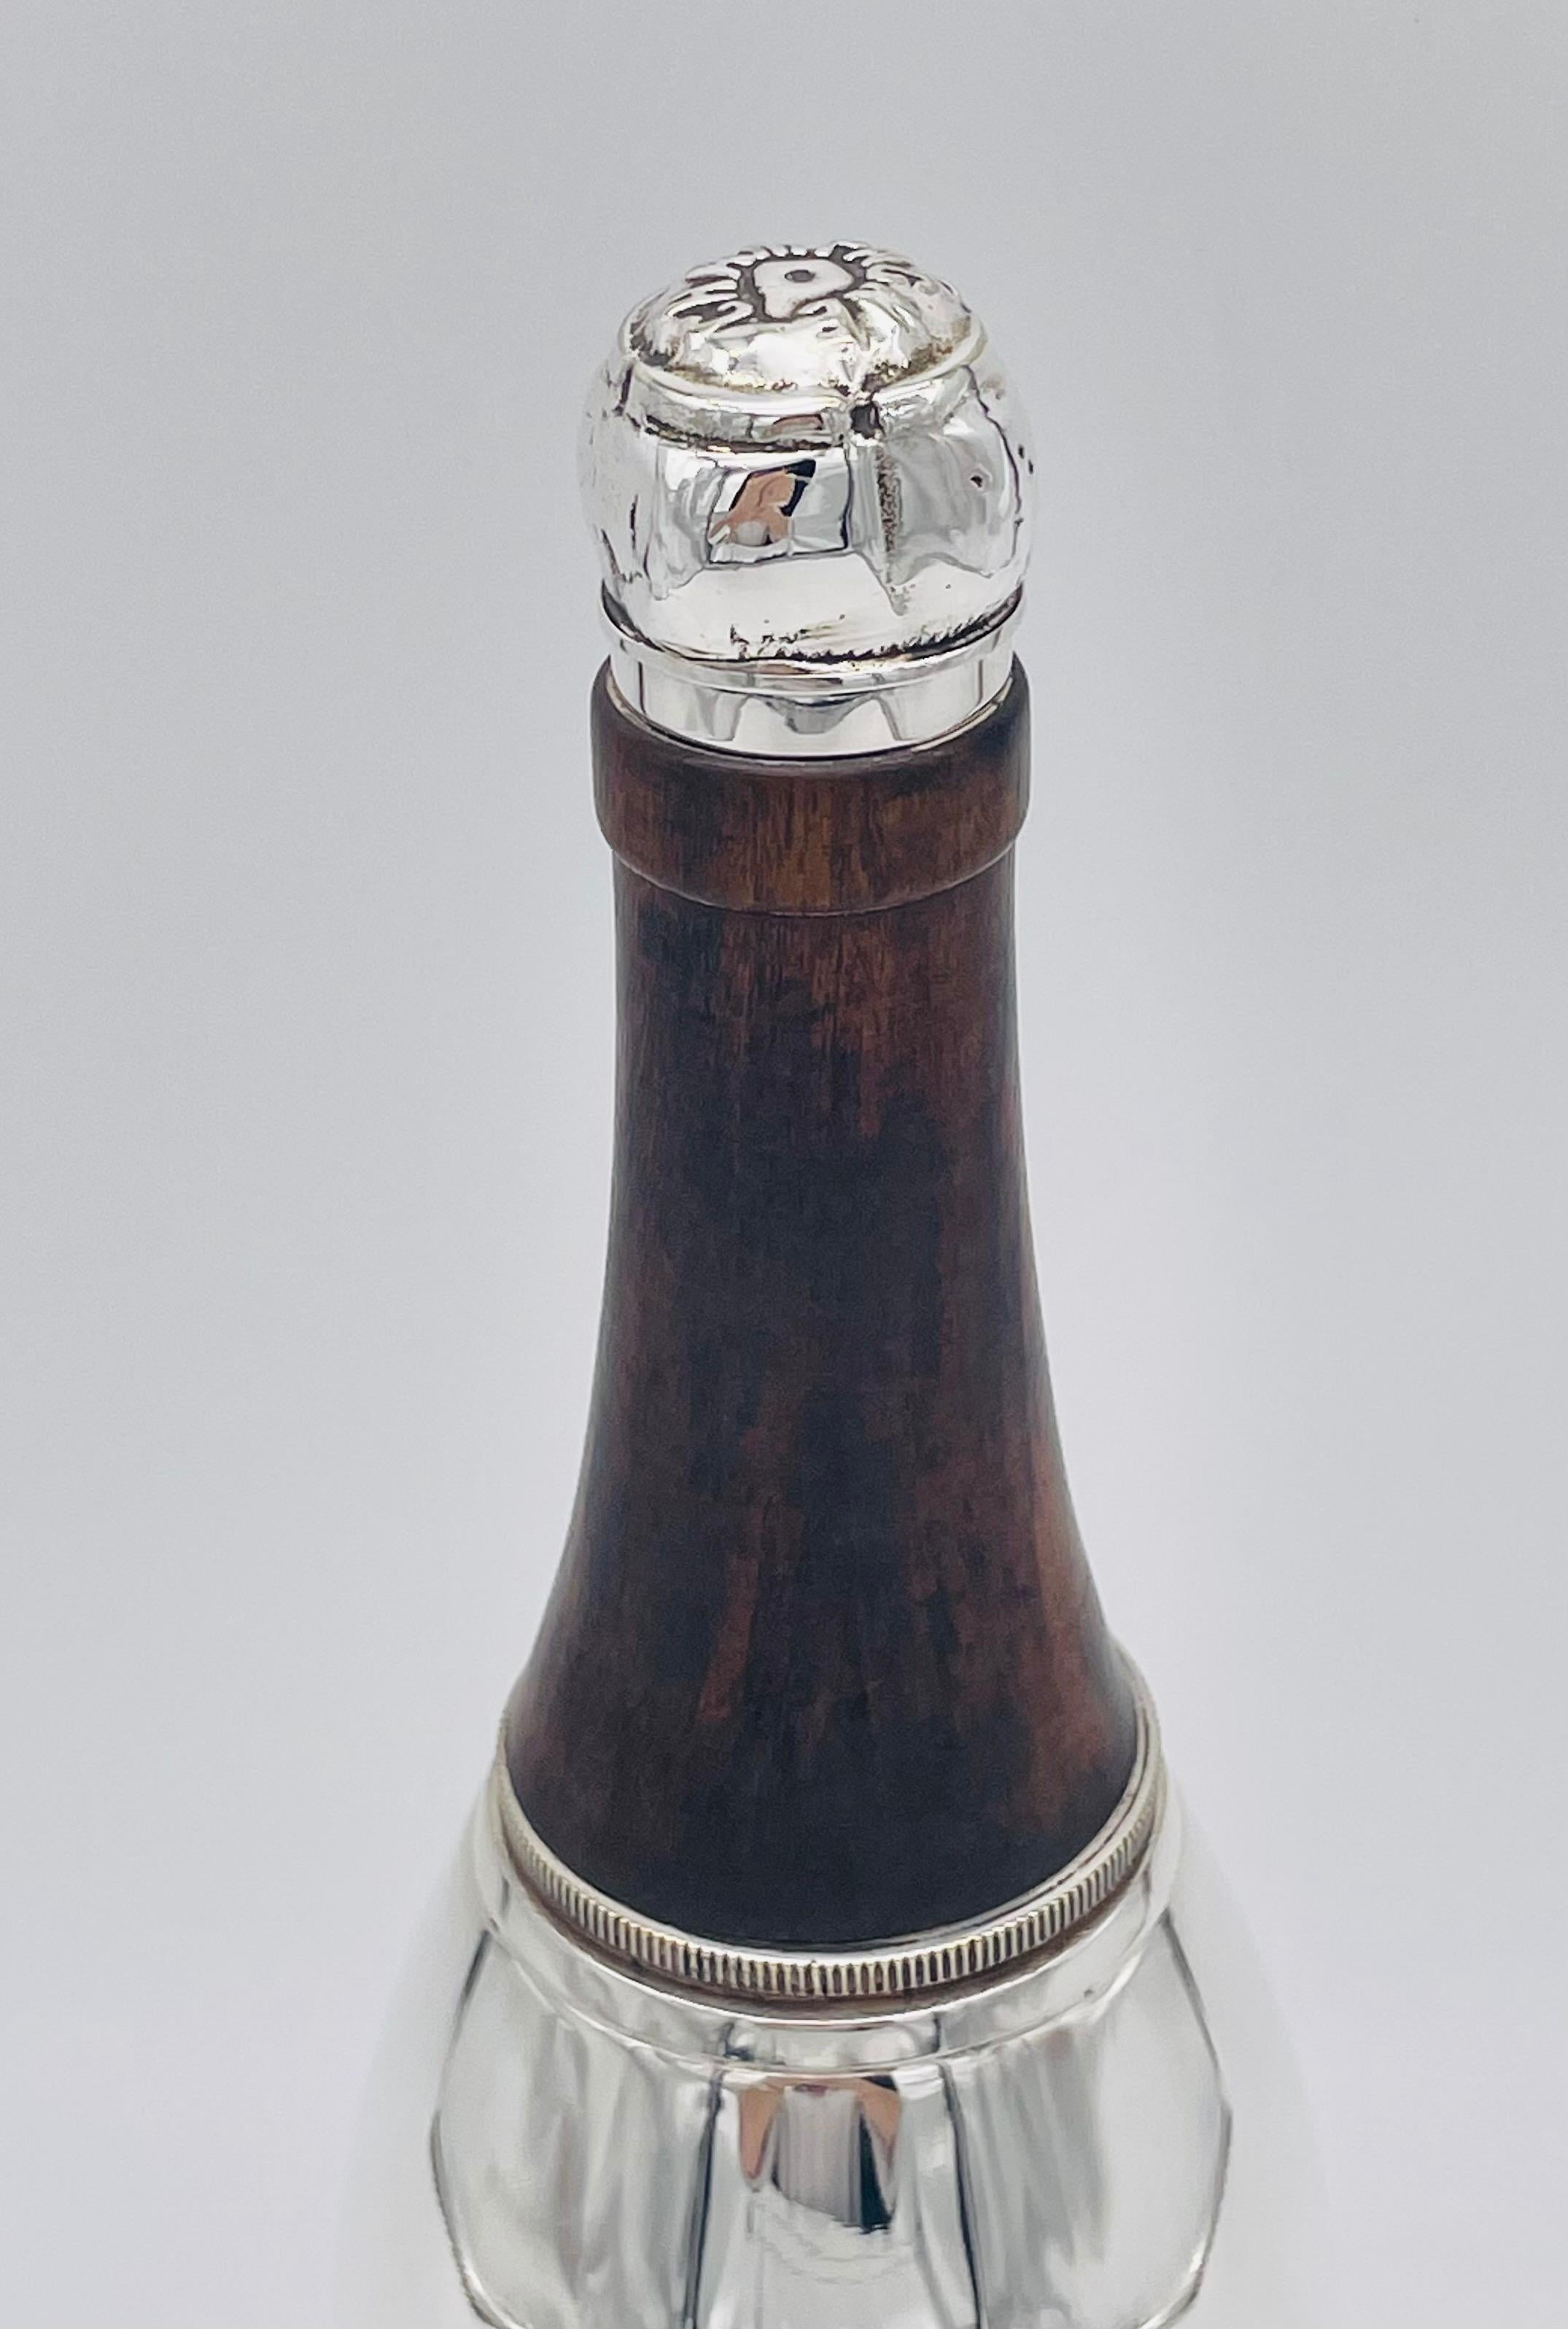 An English novelty cocktail shaker in the form of a champagne bottle.
There were several different novelty cocktail shakers made in the 1930s and 40s, and their popularity and rarity have meant that many are now being reproduced. This one is an